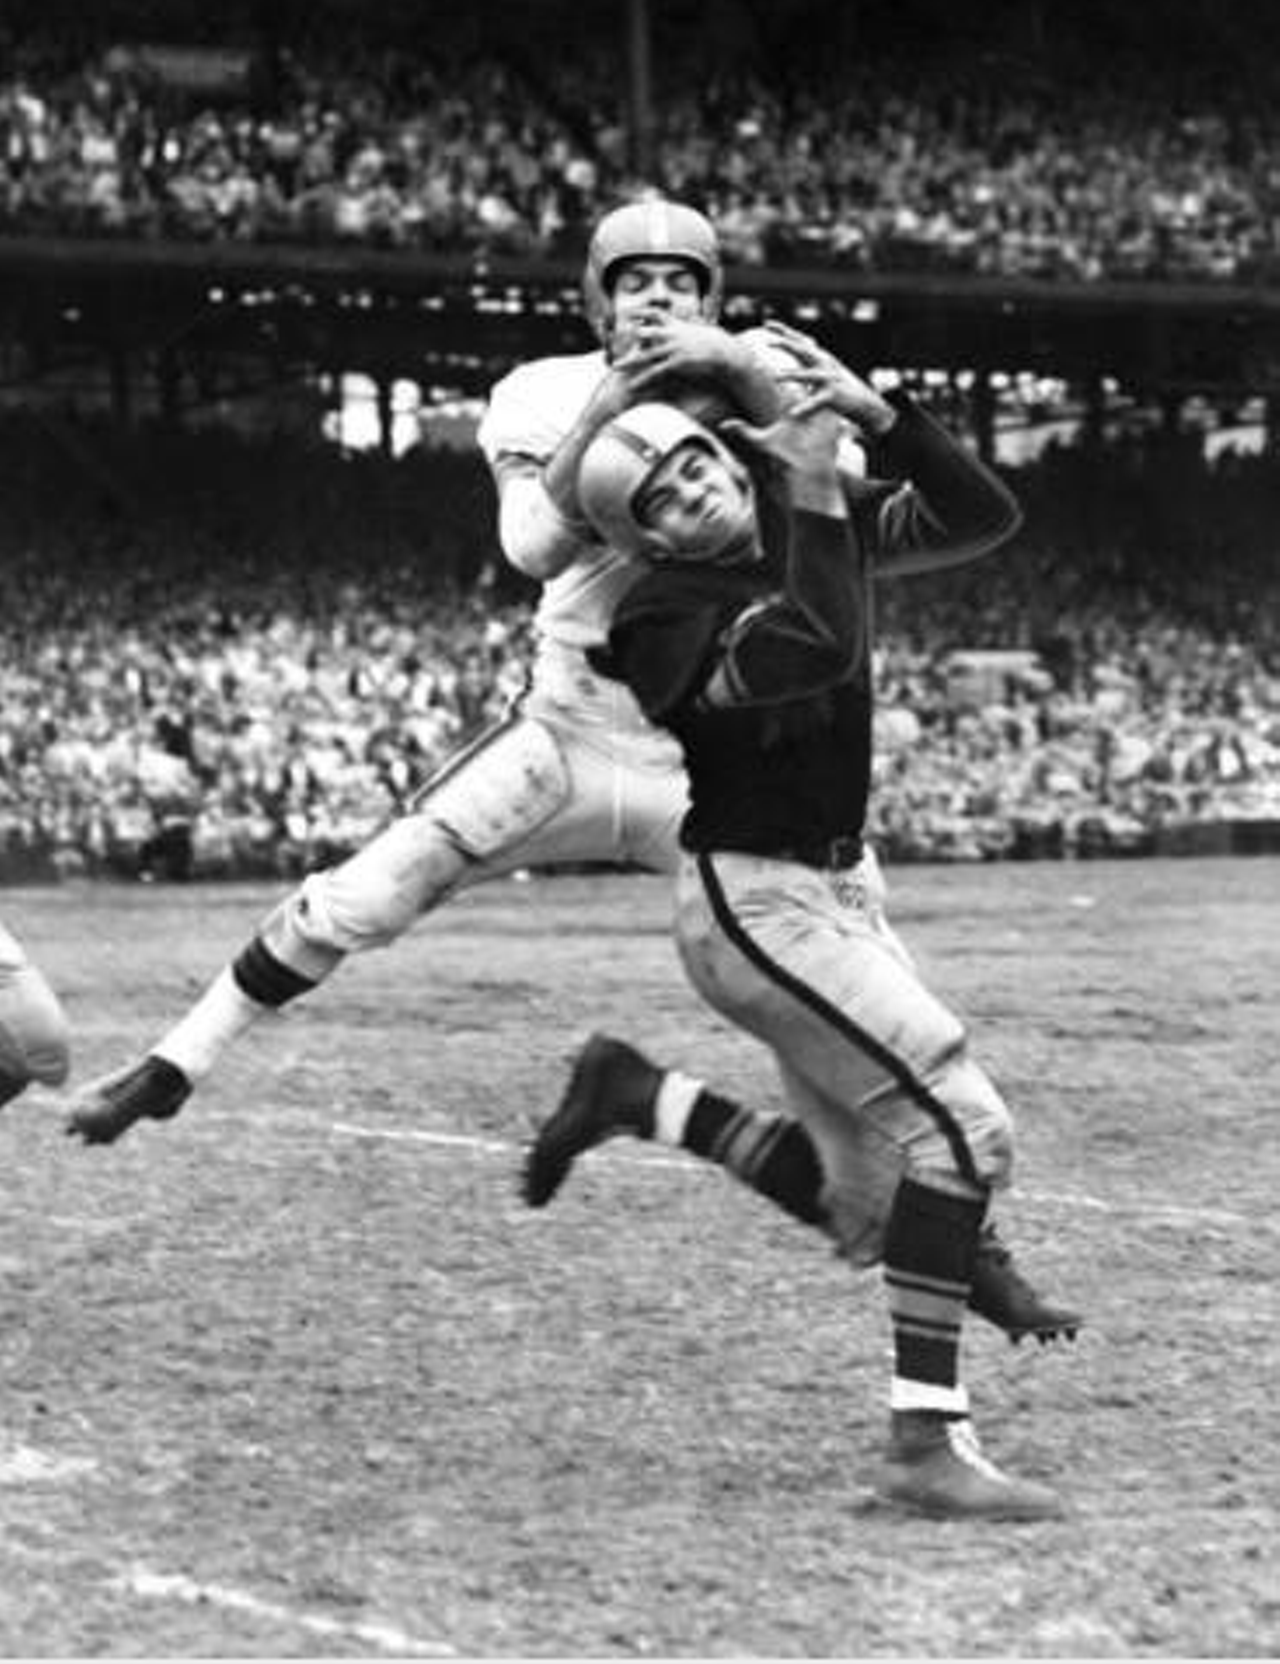 Cleveland Browns vs. Pittsburgh Steelers- 1953
"Dante Lavelli goes up and over Steelers defender Art DeCarlo to pull in a 40-yard pass from Otto Graham. Browns beat the Steelers twice in 1953, 34-16 and 20-16."